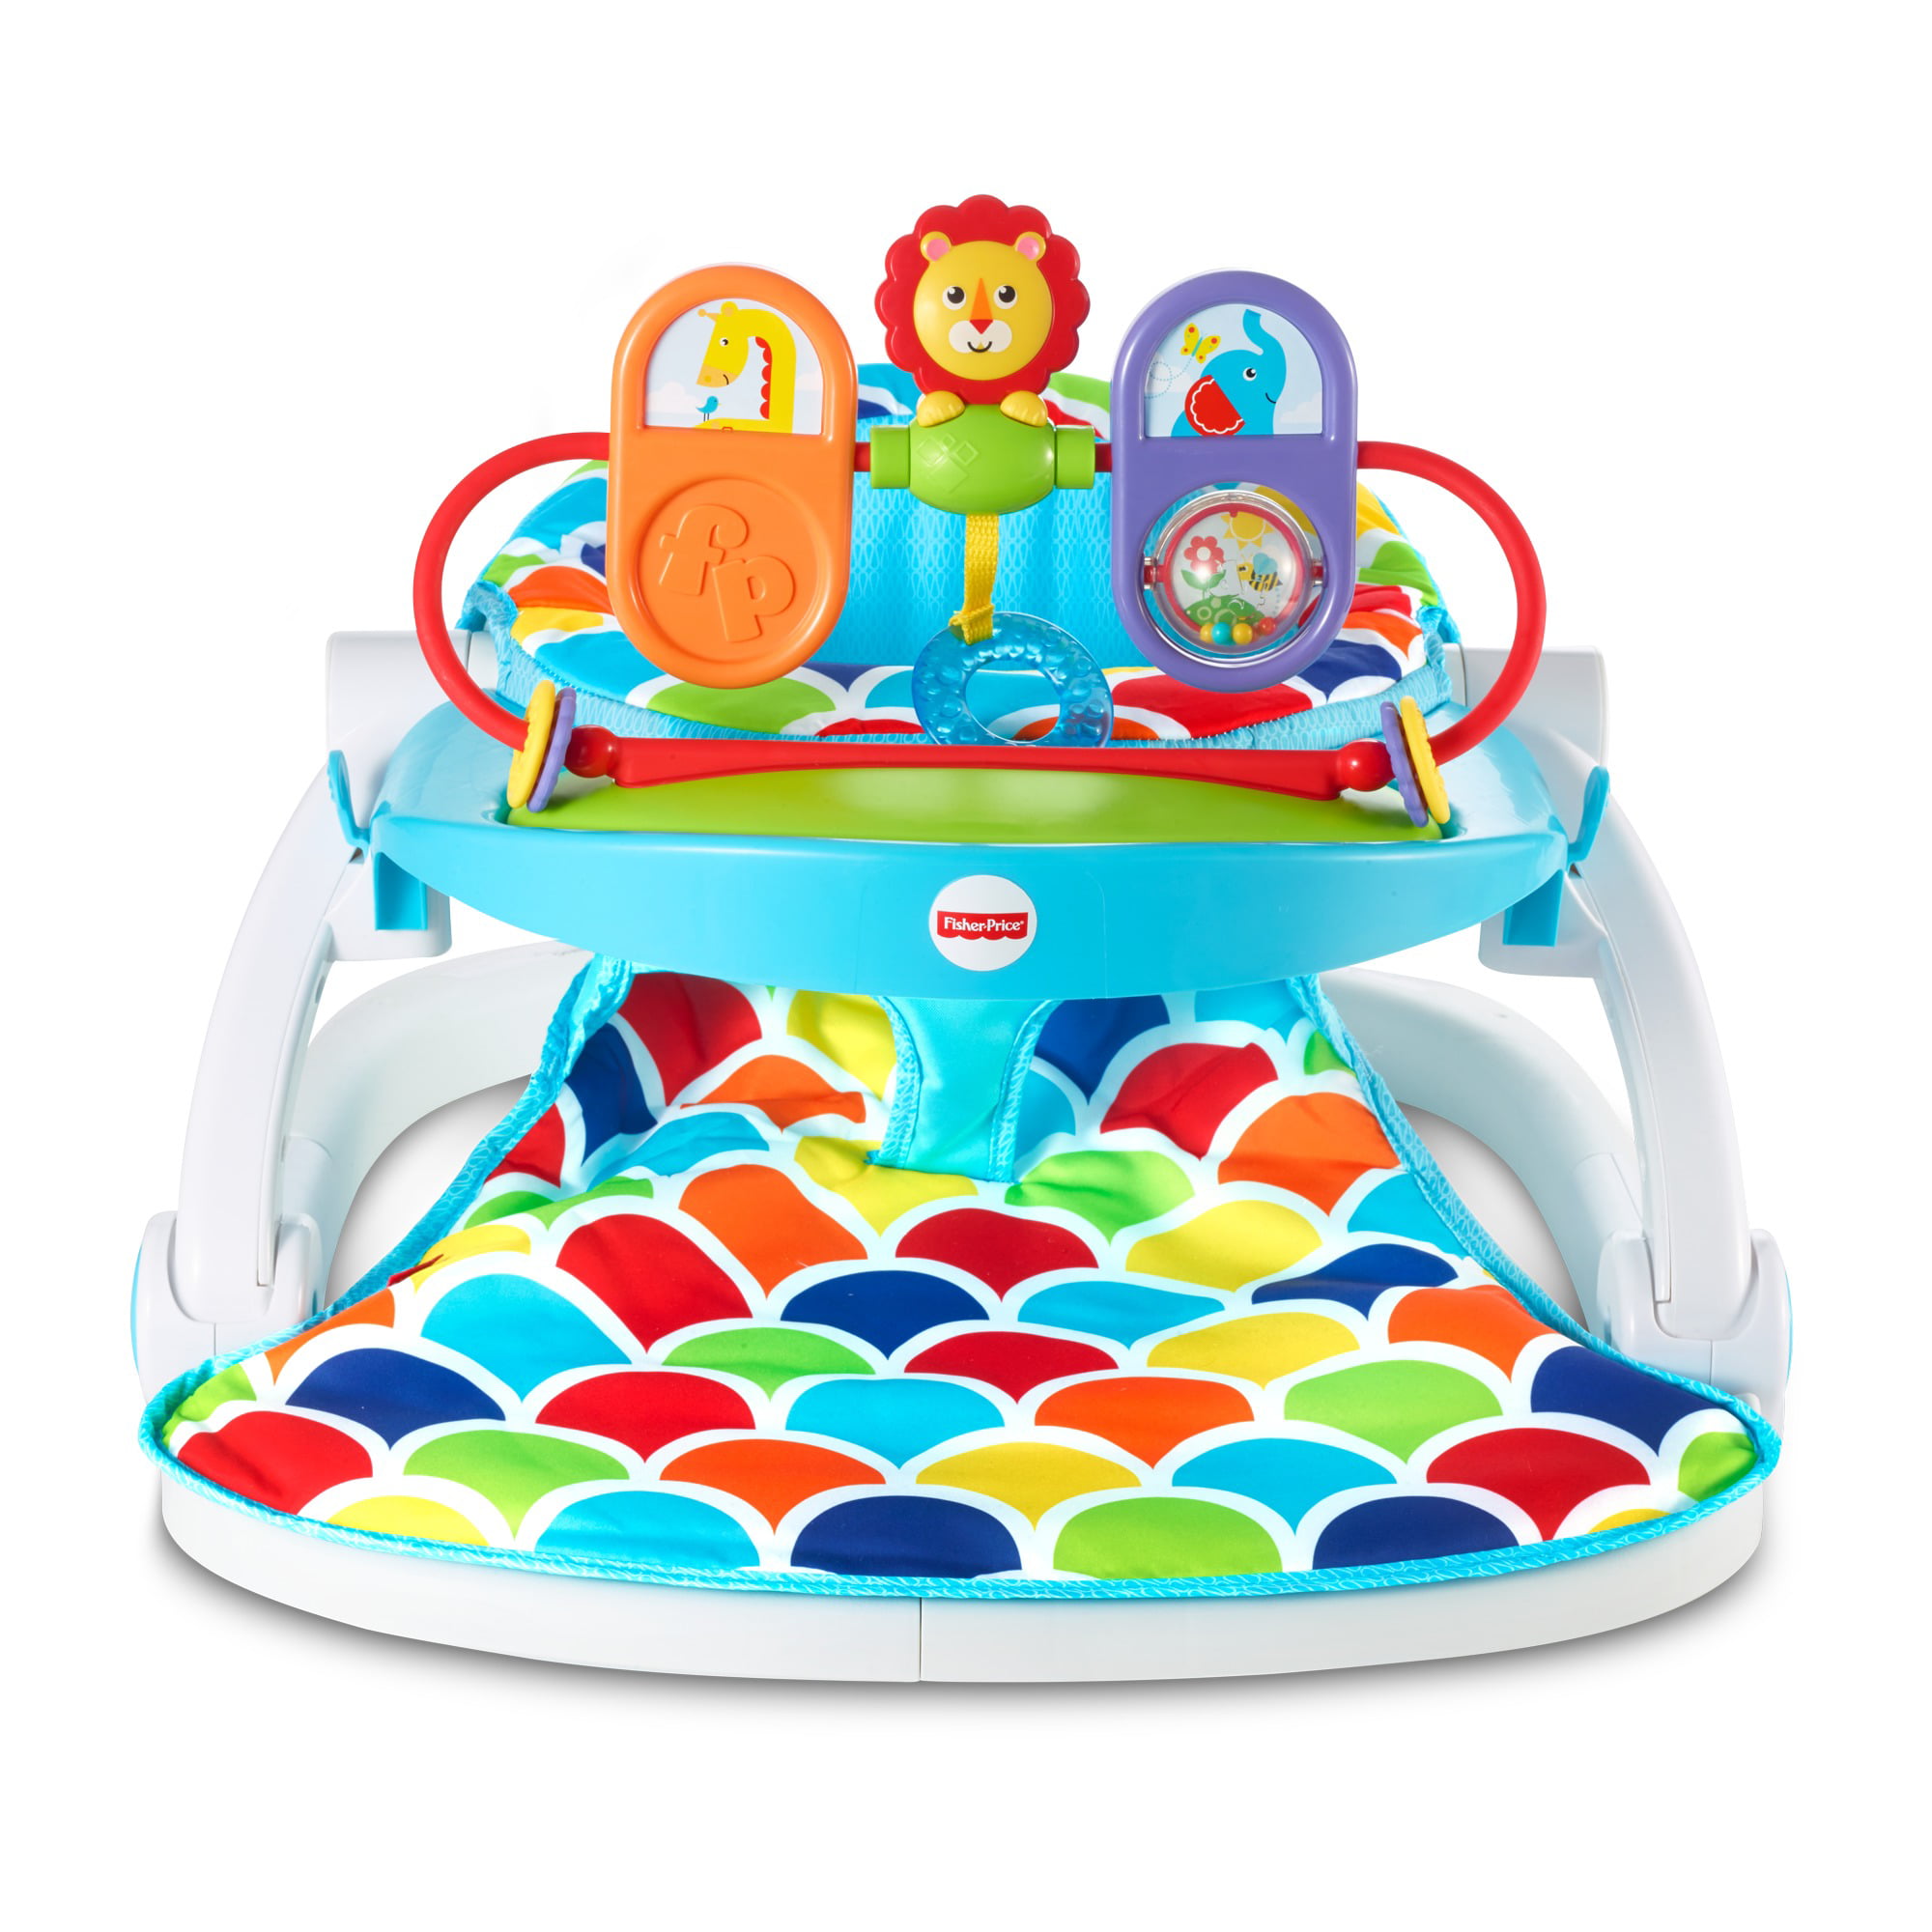 Fisher-Price Deluxe Sit-Me-Up Floor Seat with Toy Tray, Multicolor